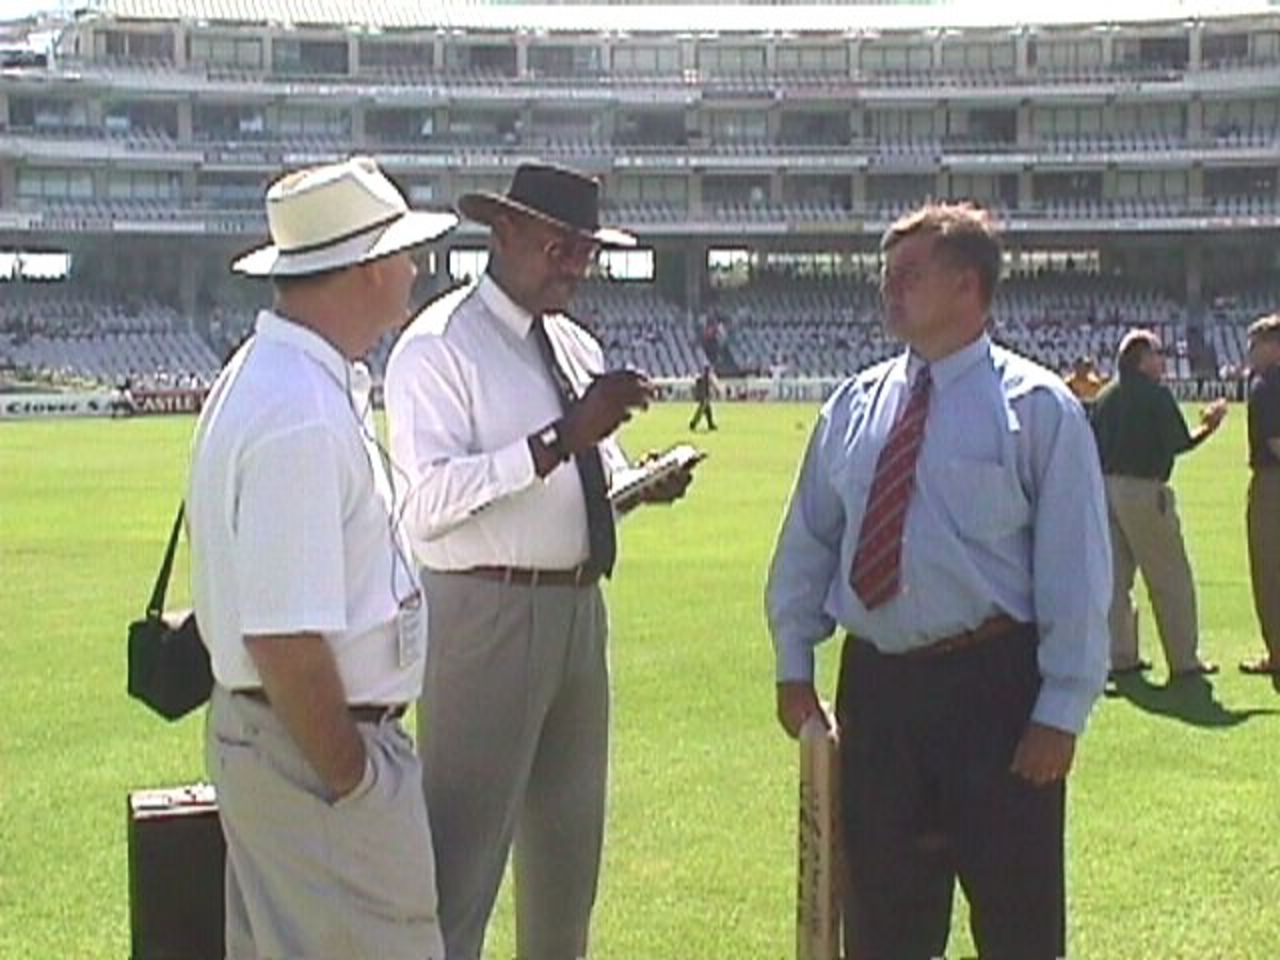 Croft (centre) with Newlands Cricket Ground curator Christo Erasmu s (right) and former England player Roger Prideaux.